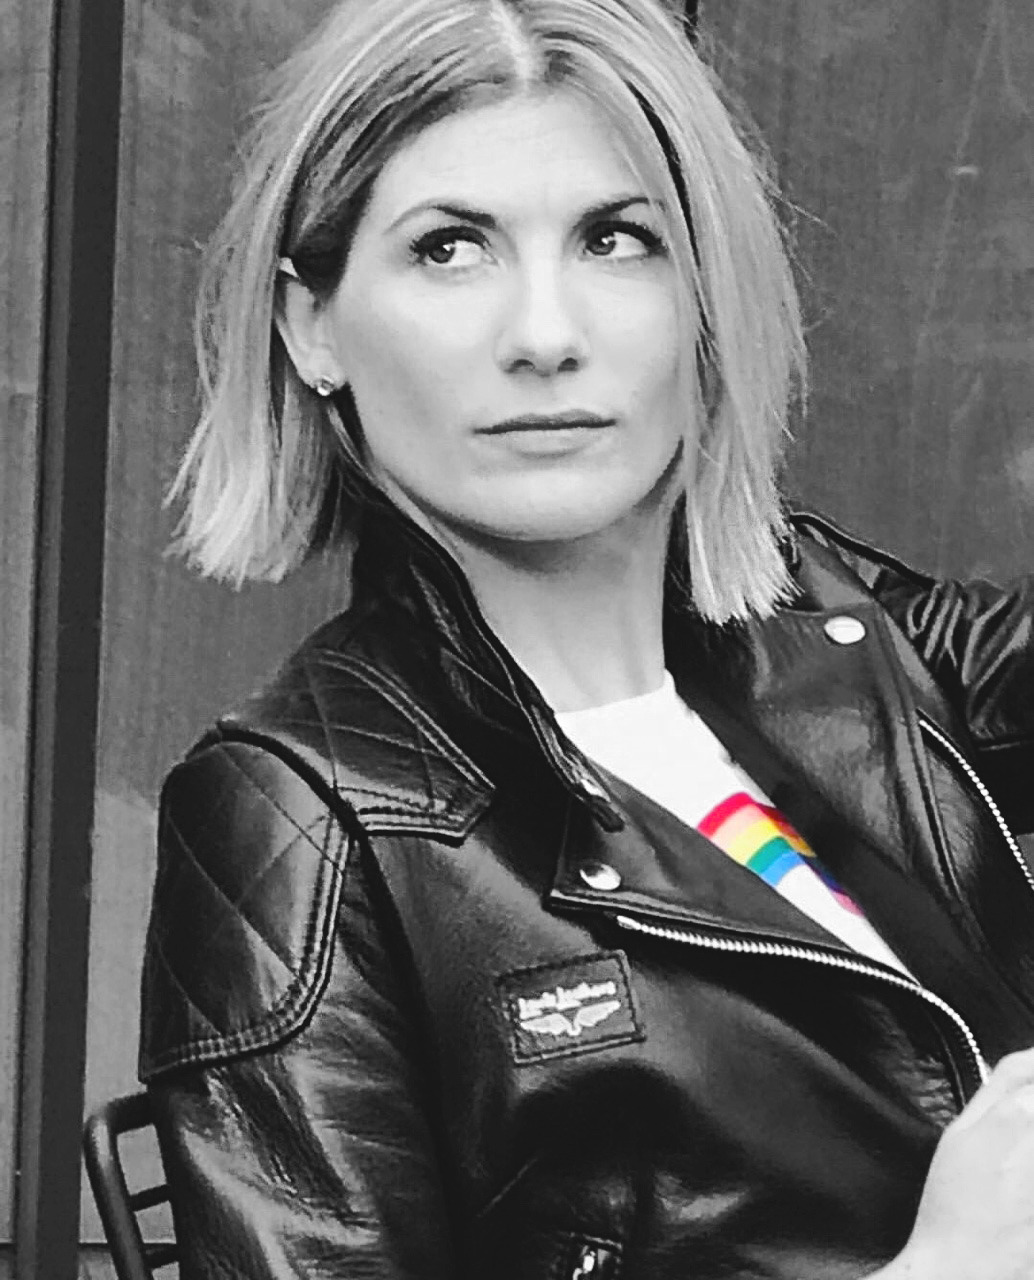 Doctor Who: Jodie Whittaker Announced As 13th Doctor 